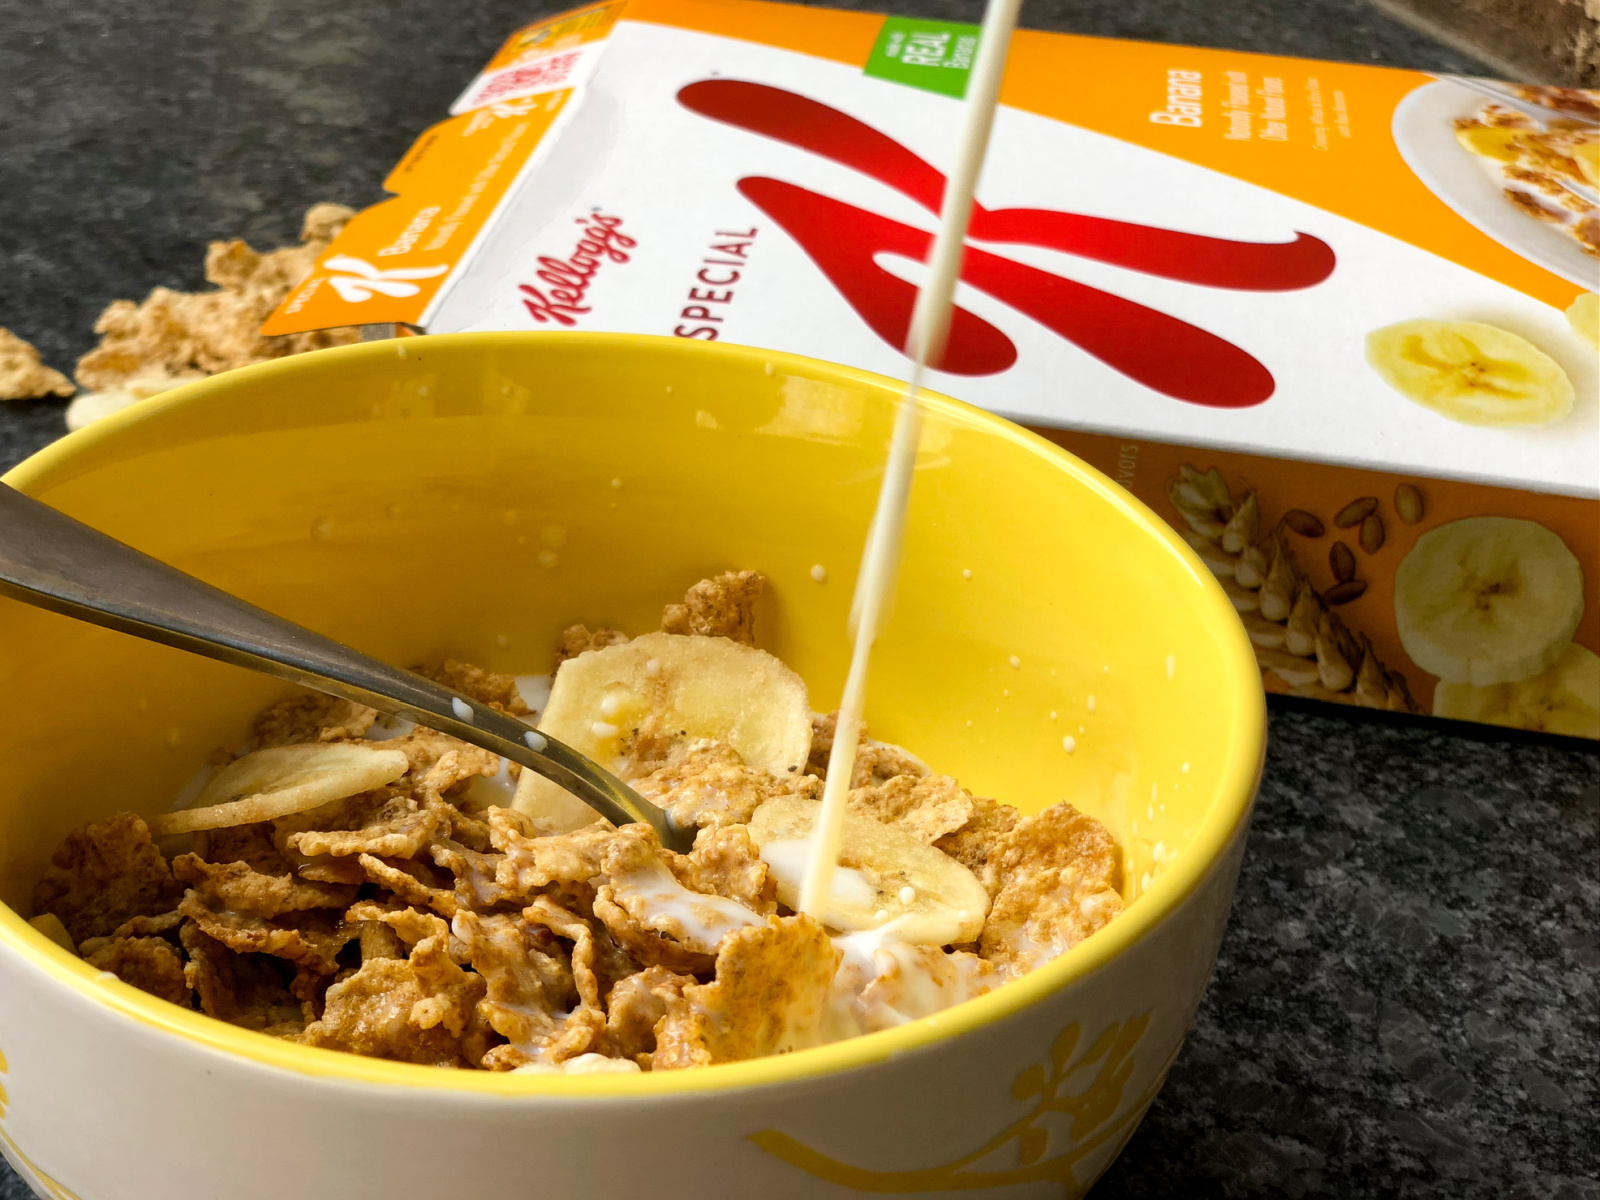 Start The Day Off With Great Taste – Your Favorite Kellogg’s® Special K® Cereals Are BOGO At Publix